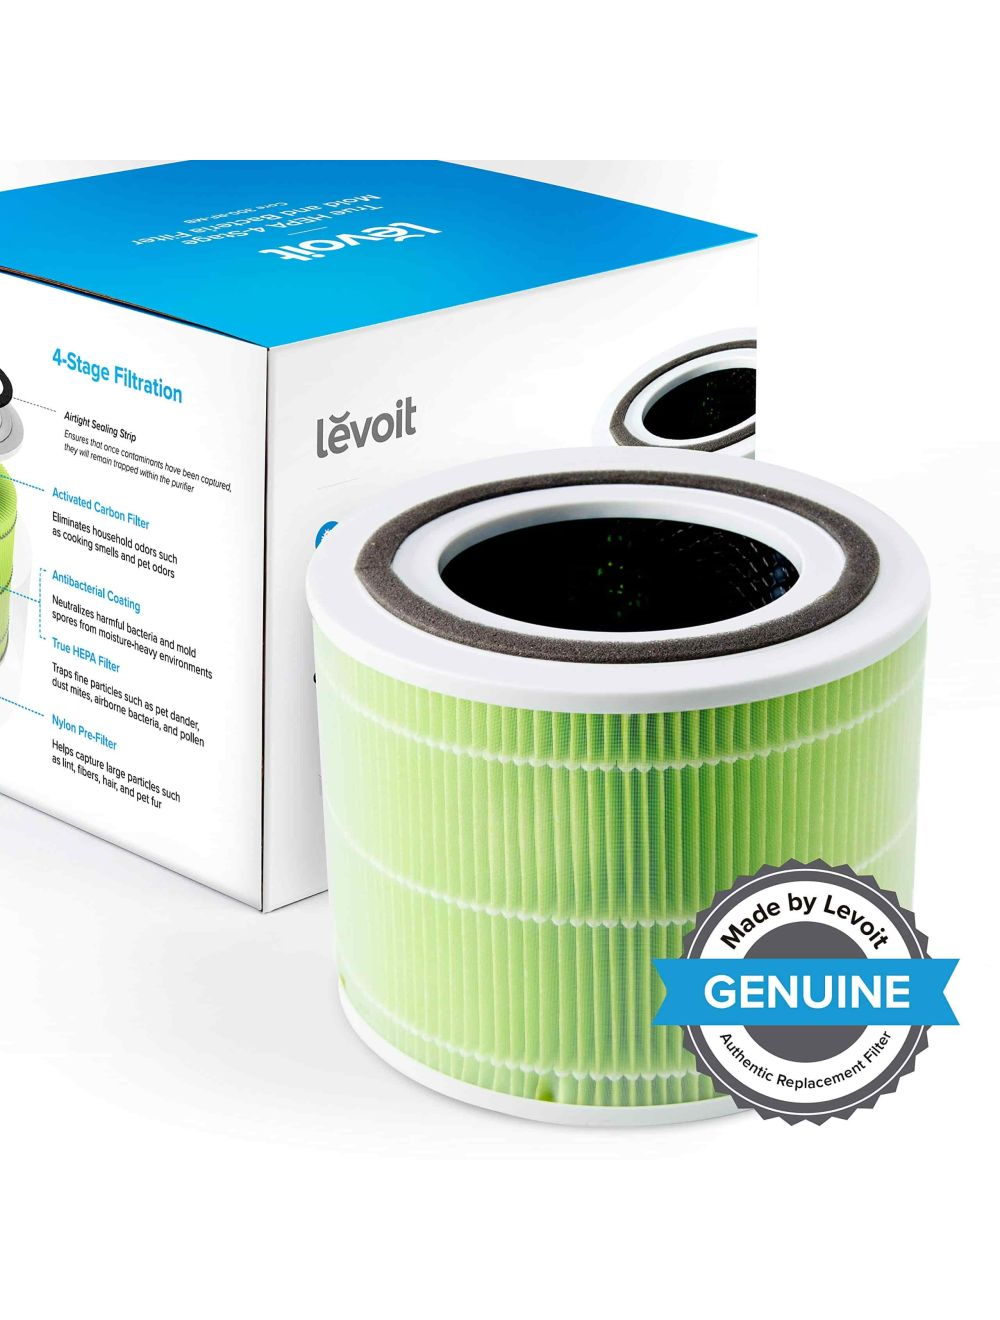 Avoid these Levoit Core 300 Heppa Filter replacements at all cost :  r/AirPurifiers